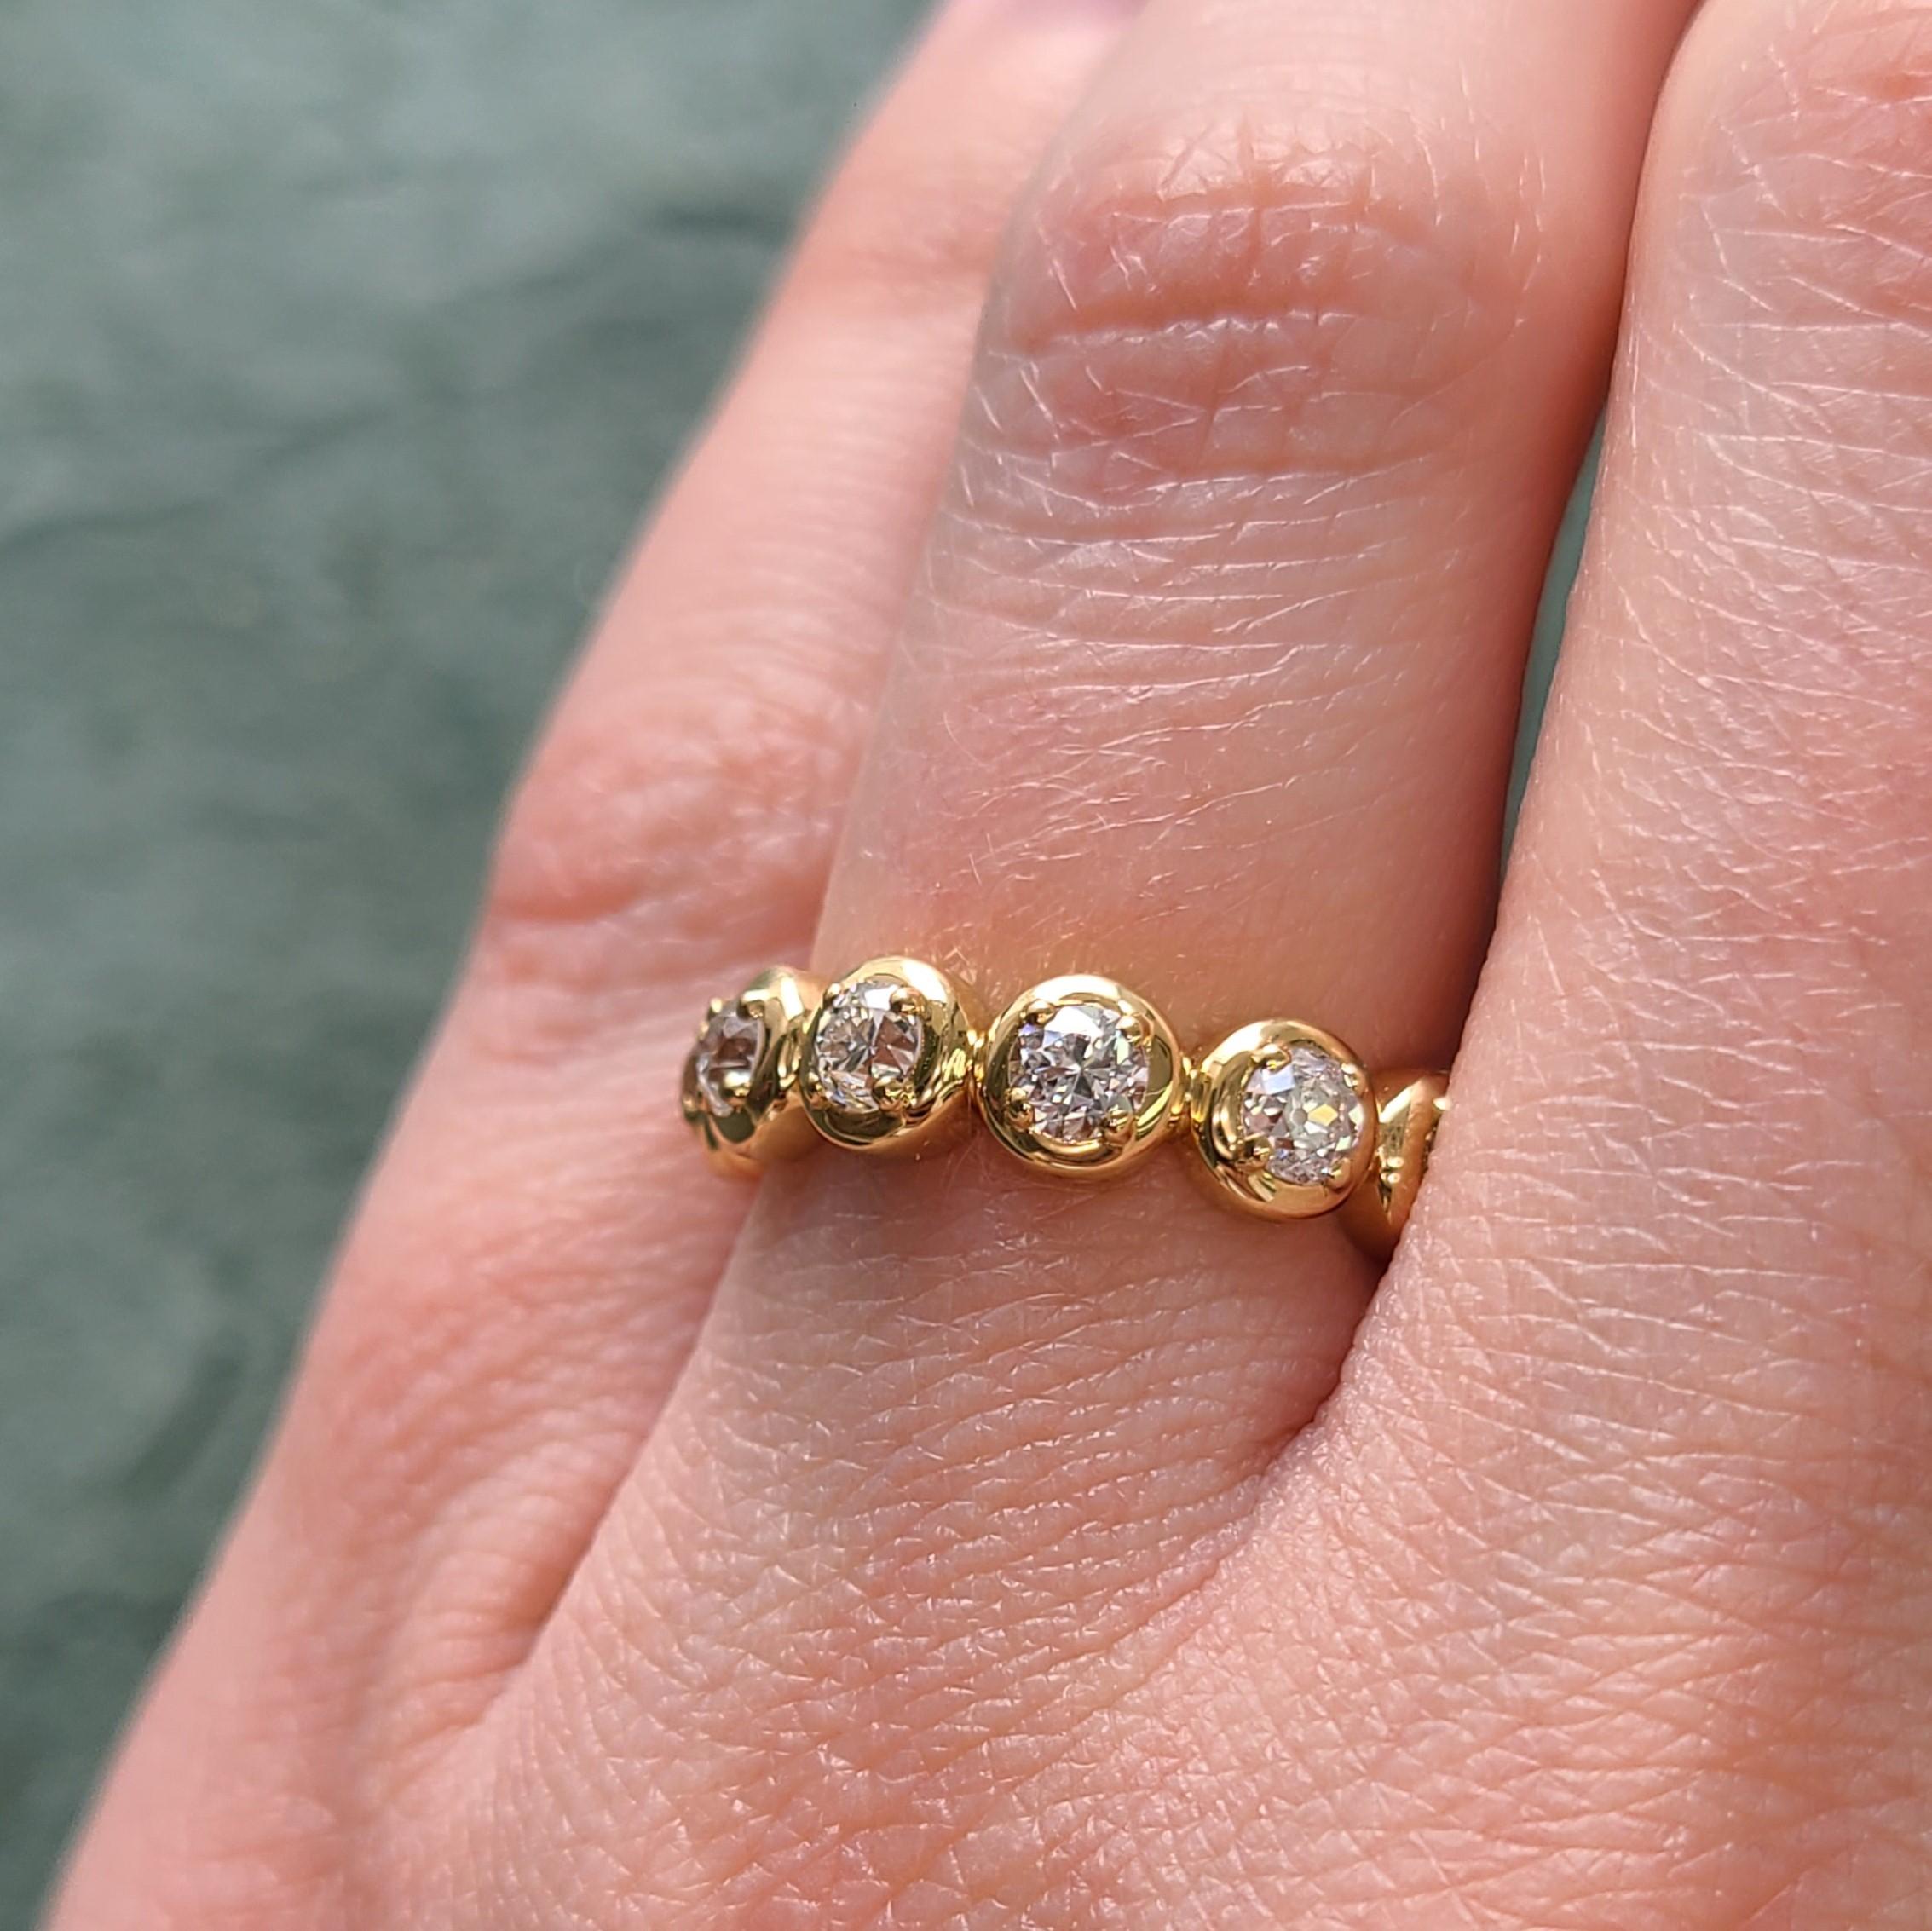 For Sale:  Handcrafted Randi Old European Cut Diamond Eternity Band by Single Stone 3